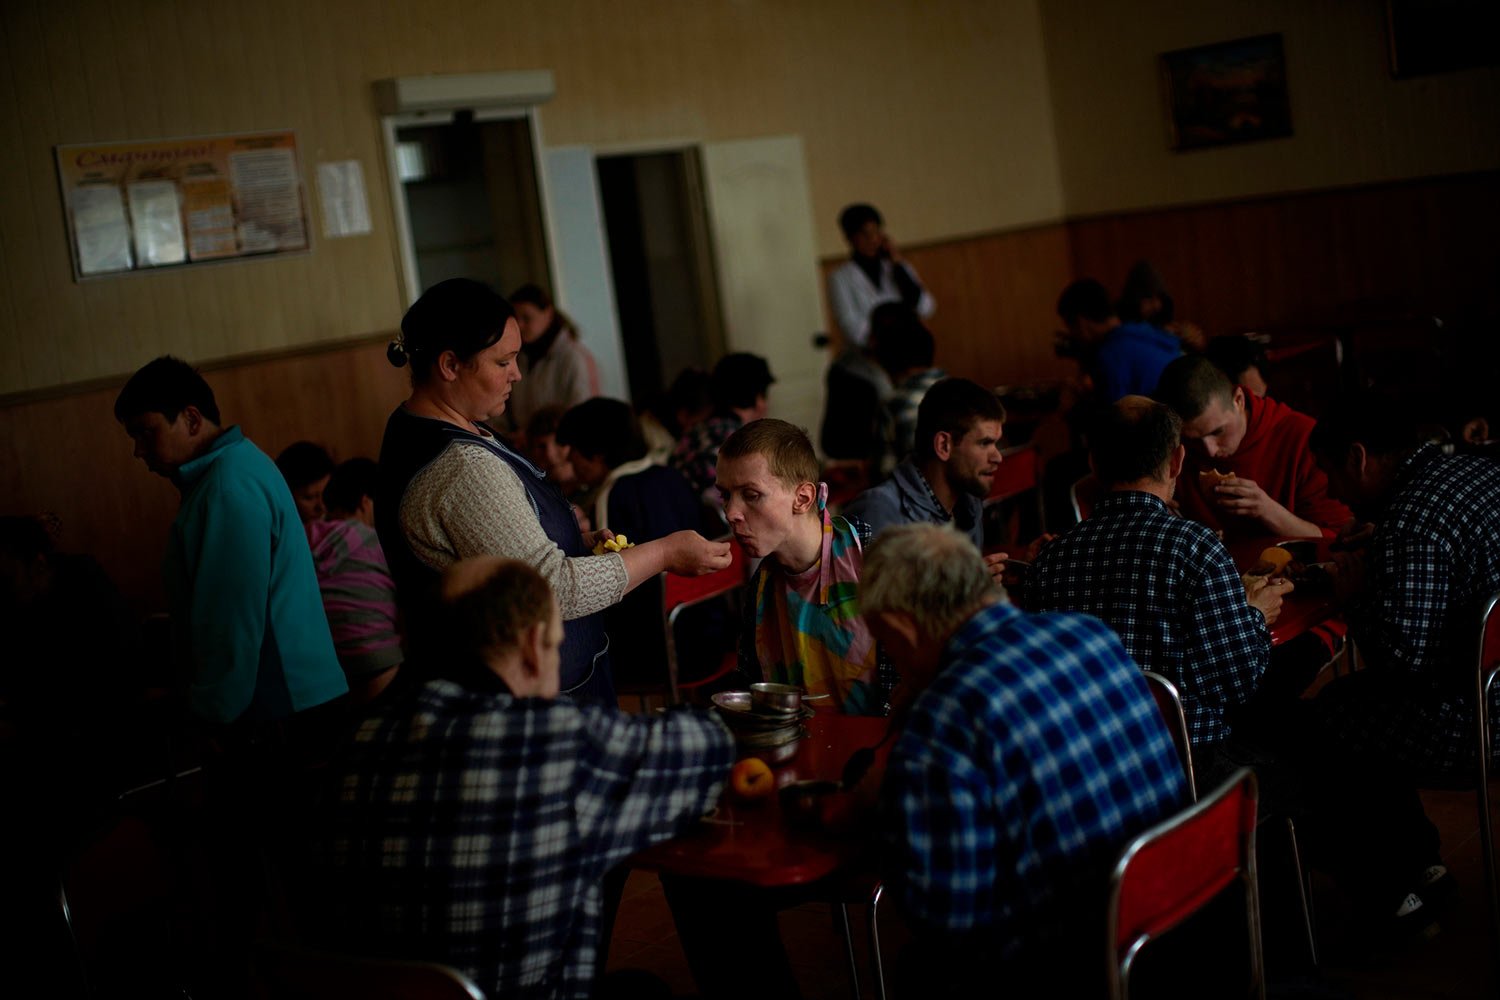  Residents have their lunch in a facility for people with mental and physical disabilities in the village of Tavriiske, Ukraine, Tuesday, May 10, 2022. With around 425 residents, the institution is the largest such facility for people with disabiliti